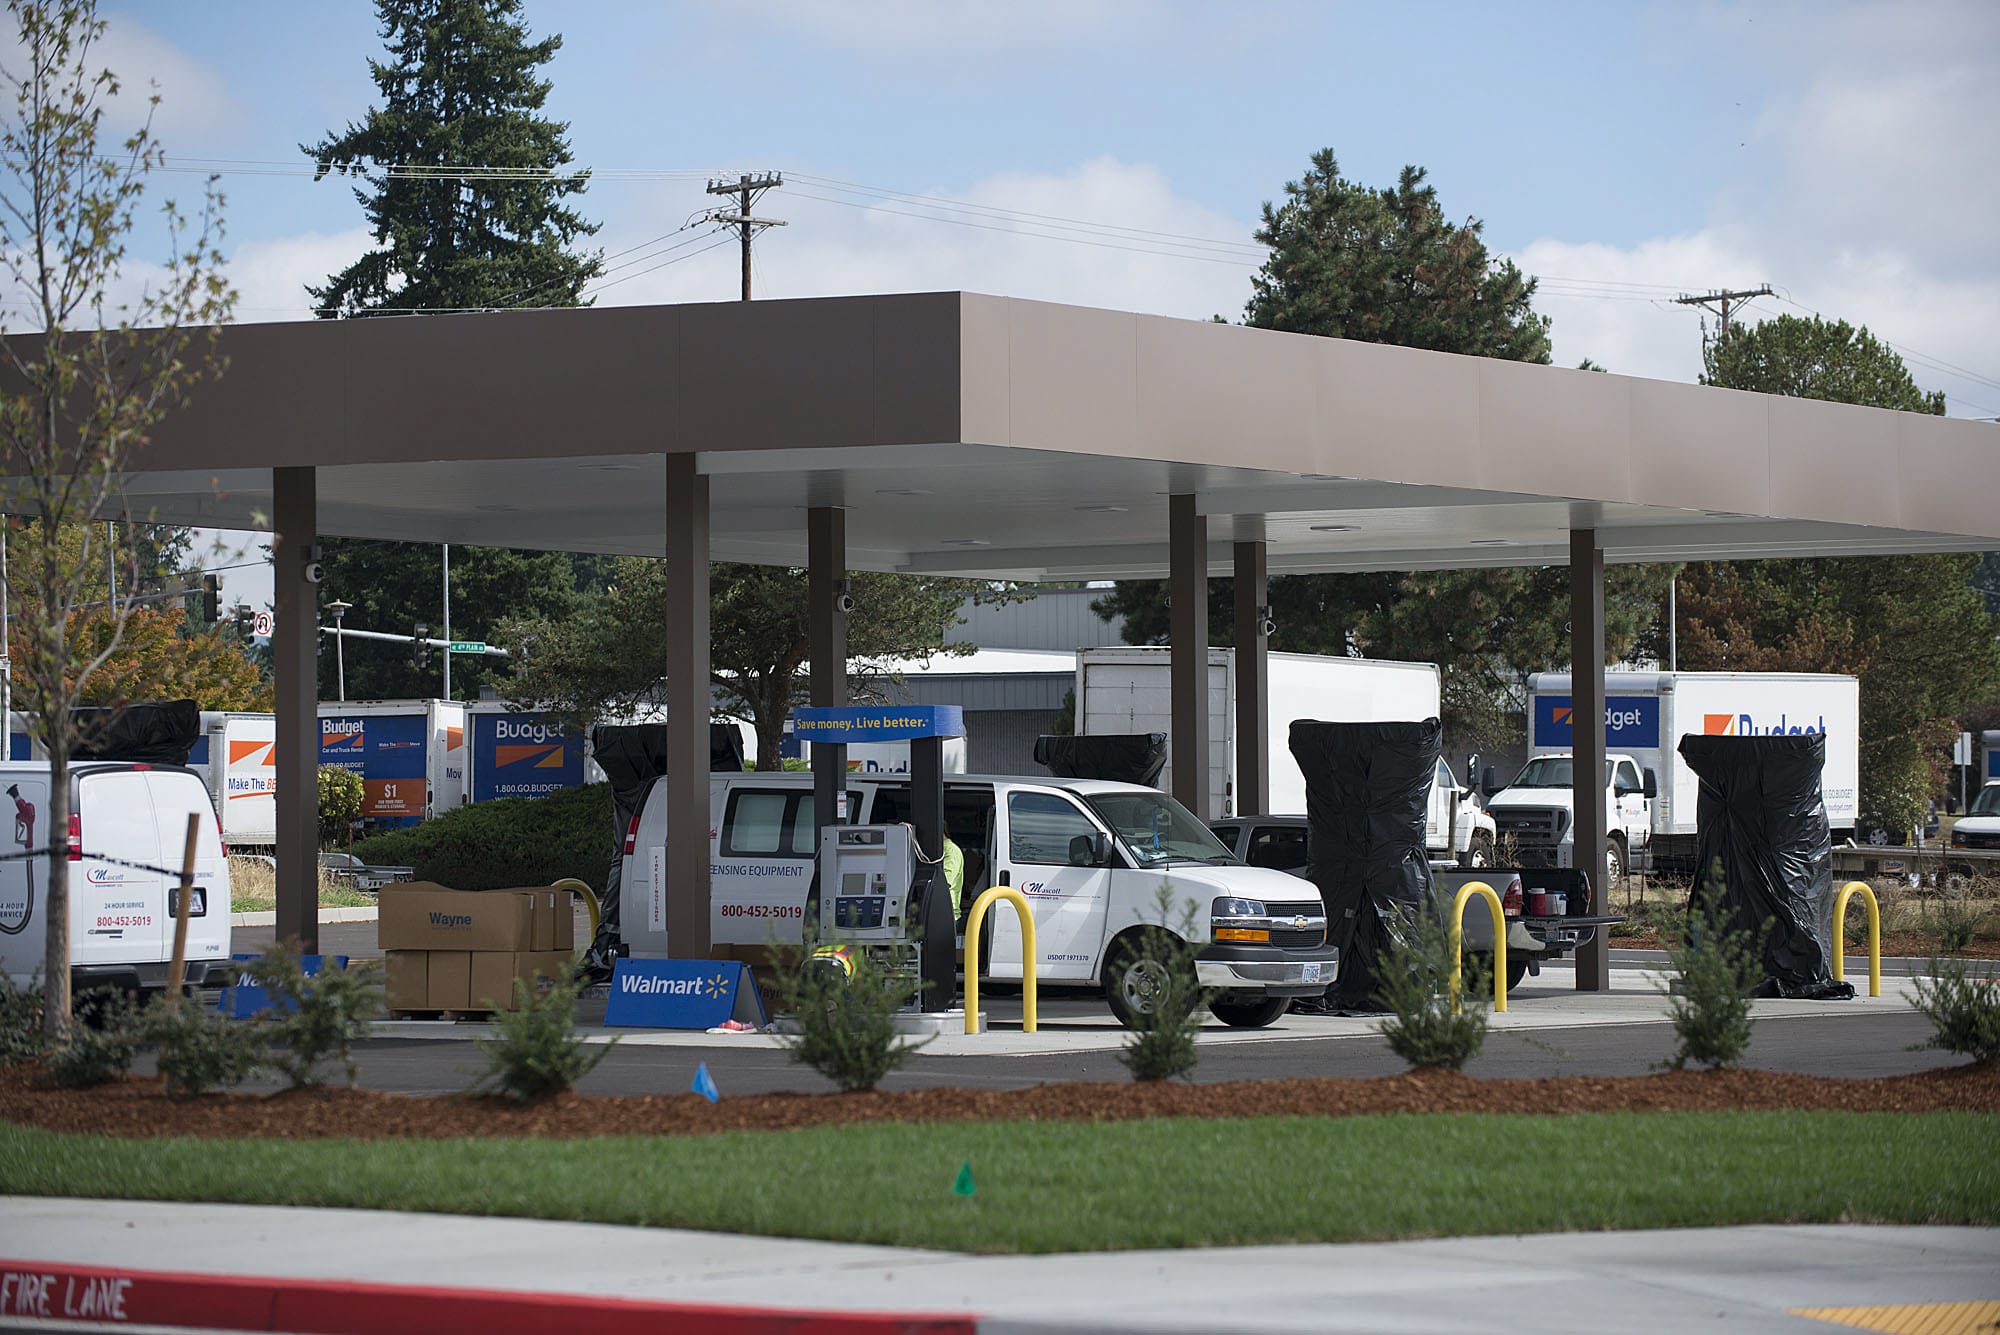 Workers help set up the fueling station at the new Wal-Mart Supercenter in Orchards. The fueling station will open Sept. 23, with a grand opening set for Oct. 3.